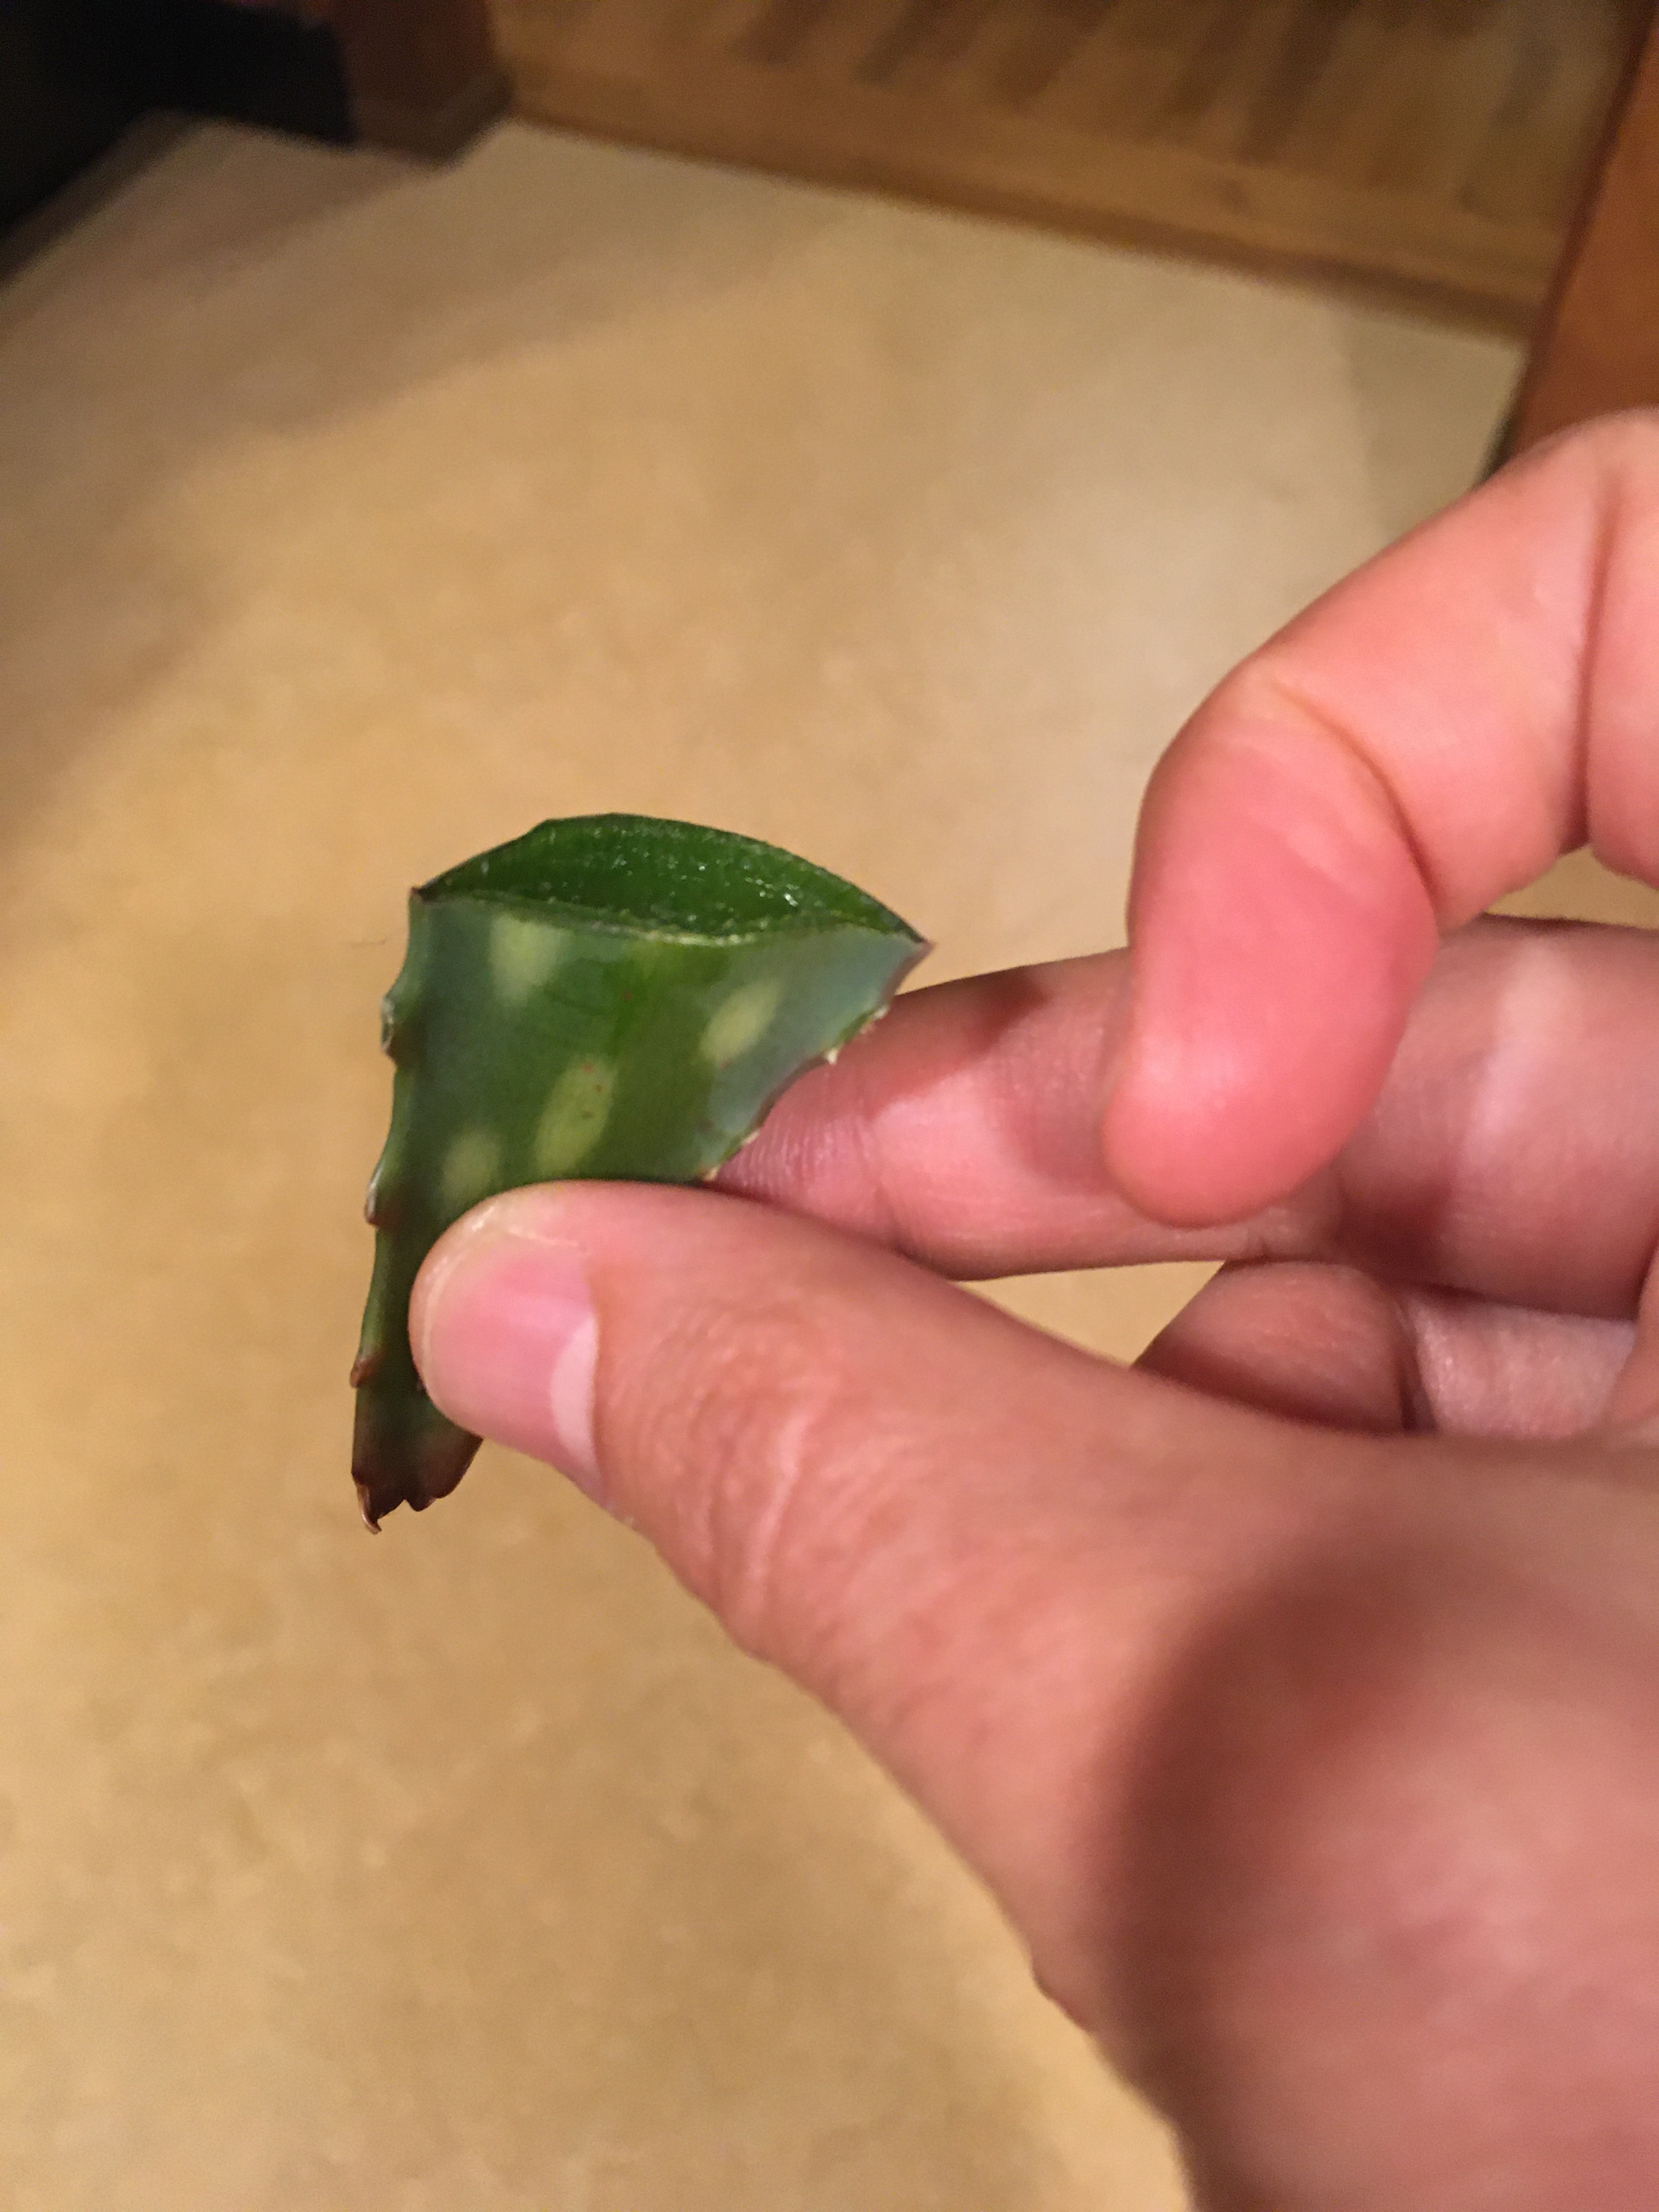 Photo of my fingers holding a small cutting of aloe.